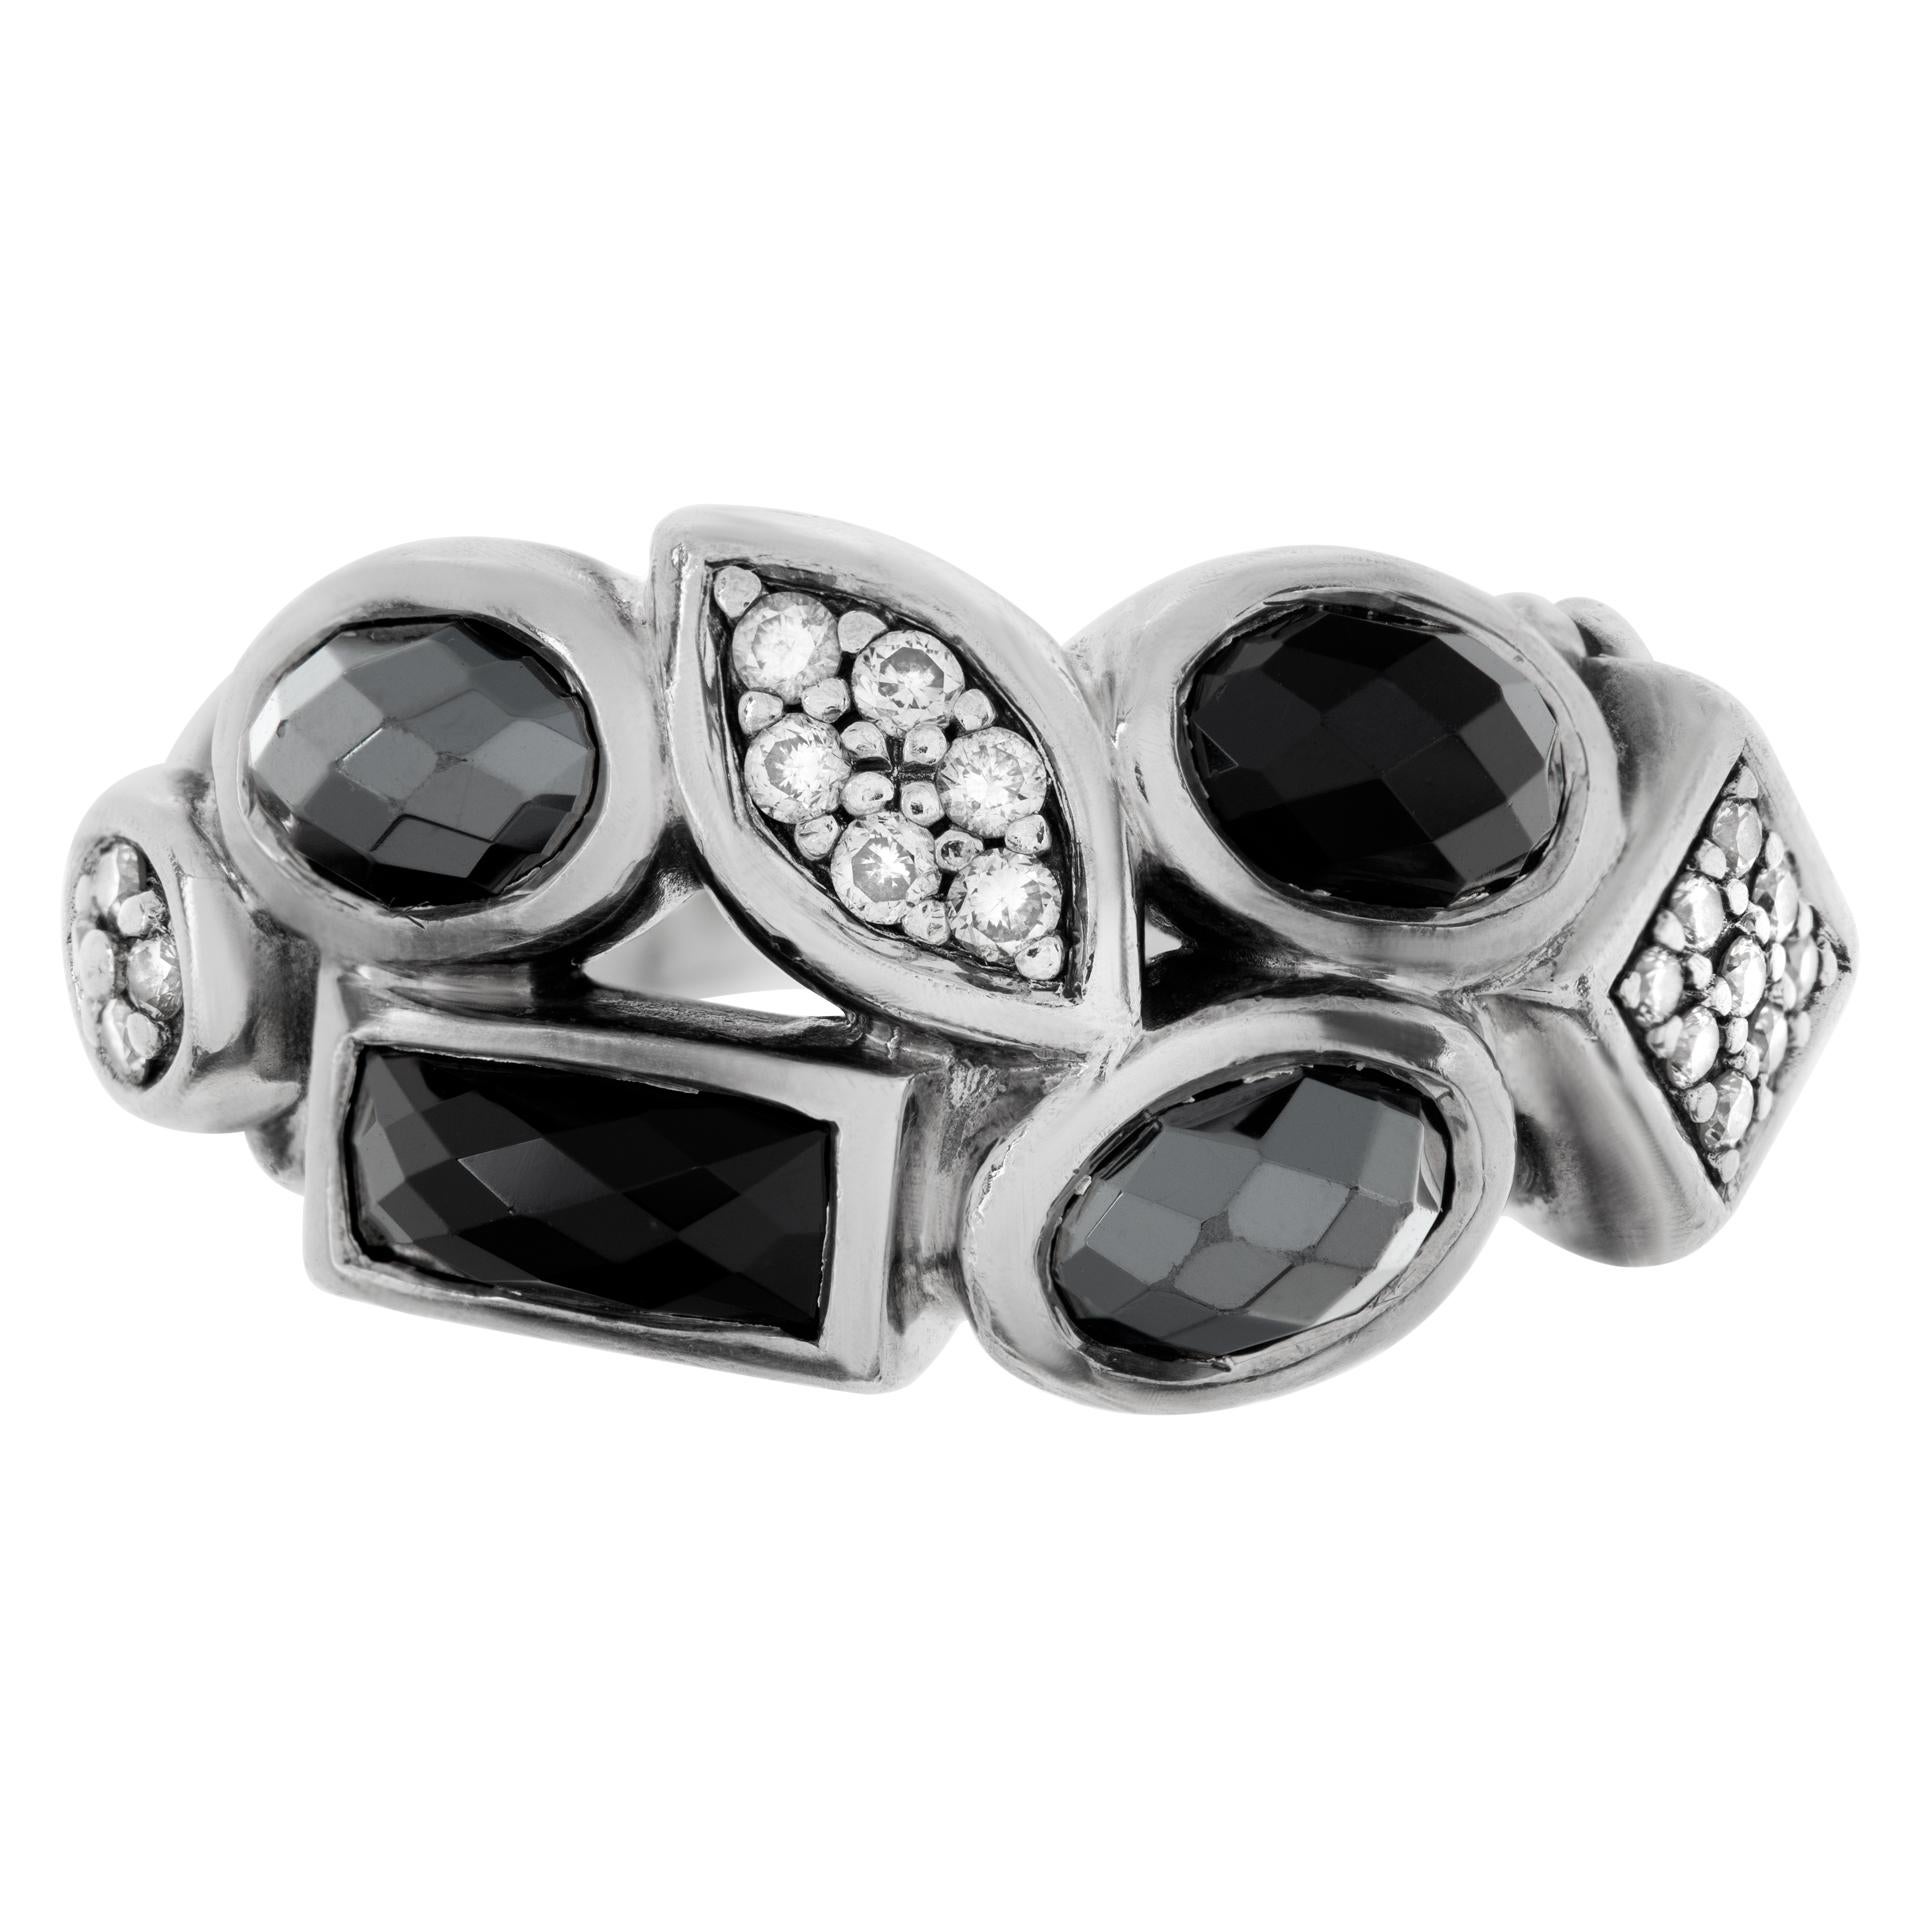 David Yurman Confetti Onyx Hematite and diamond double row ring in sterling silver. Size 5.25.This David Yurman ring is currently size 5.25 and some items can be sized up or down, please ask! It weighs 5.1 pennyweights and is Sterling Silver.